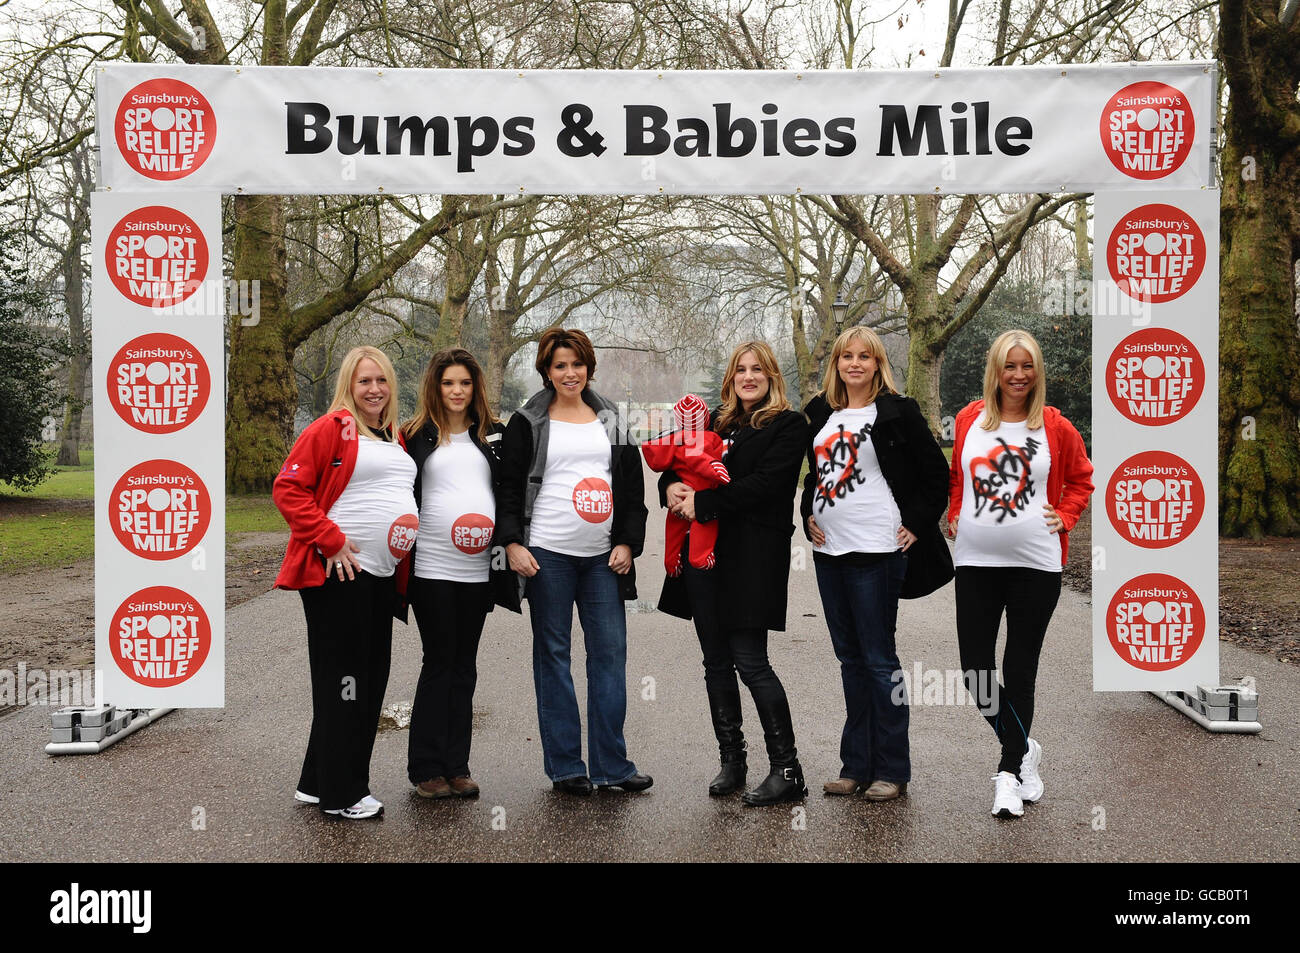 (left to right) Gail Emms, Carly Zucker, Natasha Kaplinsky, Nemone and her daughter Ella, Kim Medcalf and Denise Van Outen take part in a Bumps and Babies mile, in aid of Sport Relief in Battersea Park, London. Stock Photo